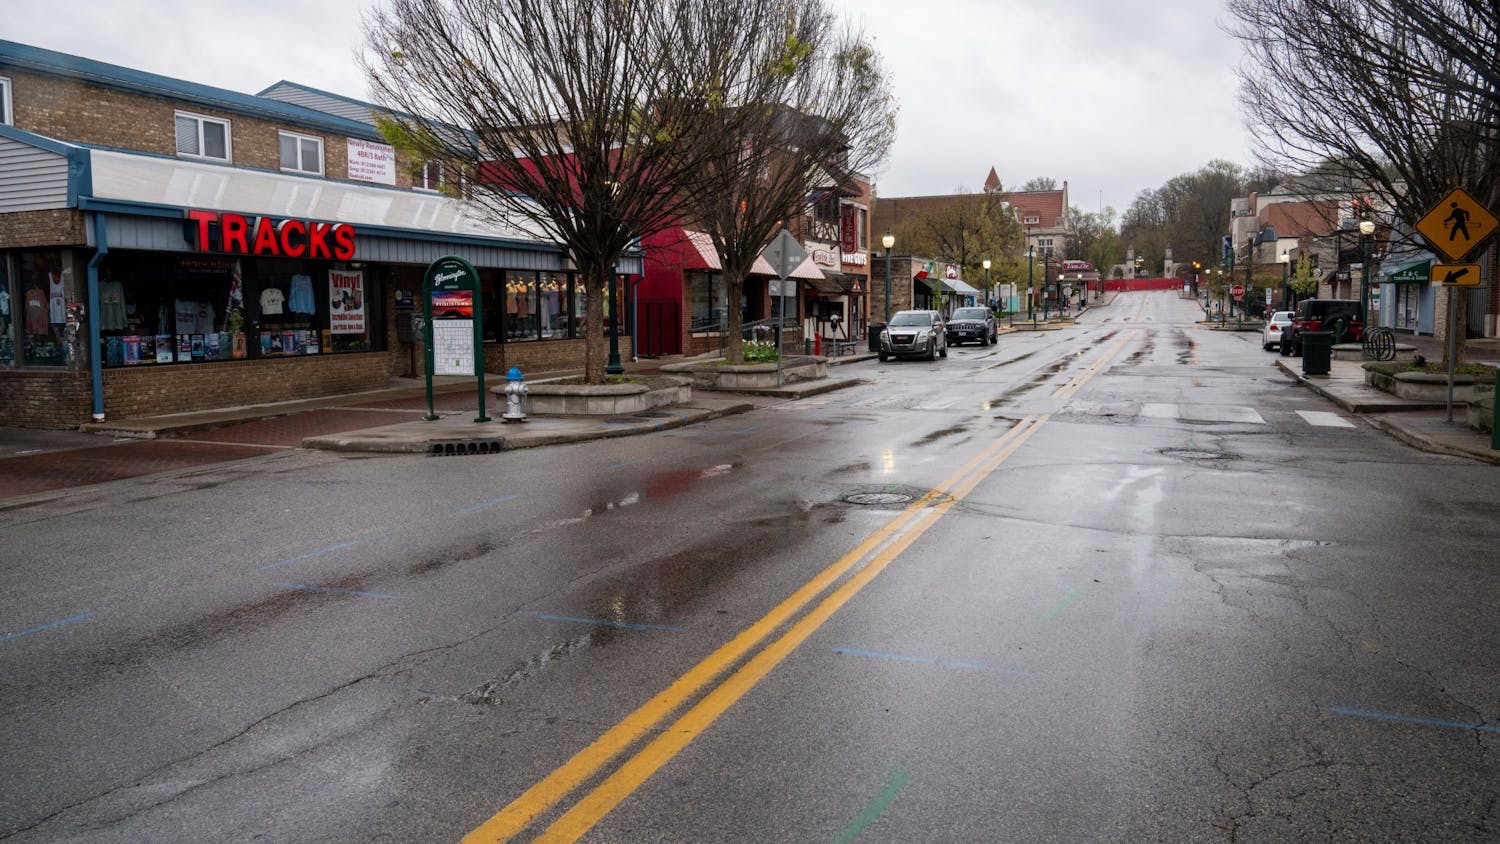 A near-empty Kirkwood Avenue is pictured. IU experts said COVID-19 has been difficult on the economy and predict that it will be especially hard on small businesses and the hospitality industry.